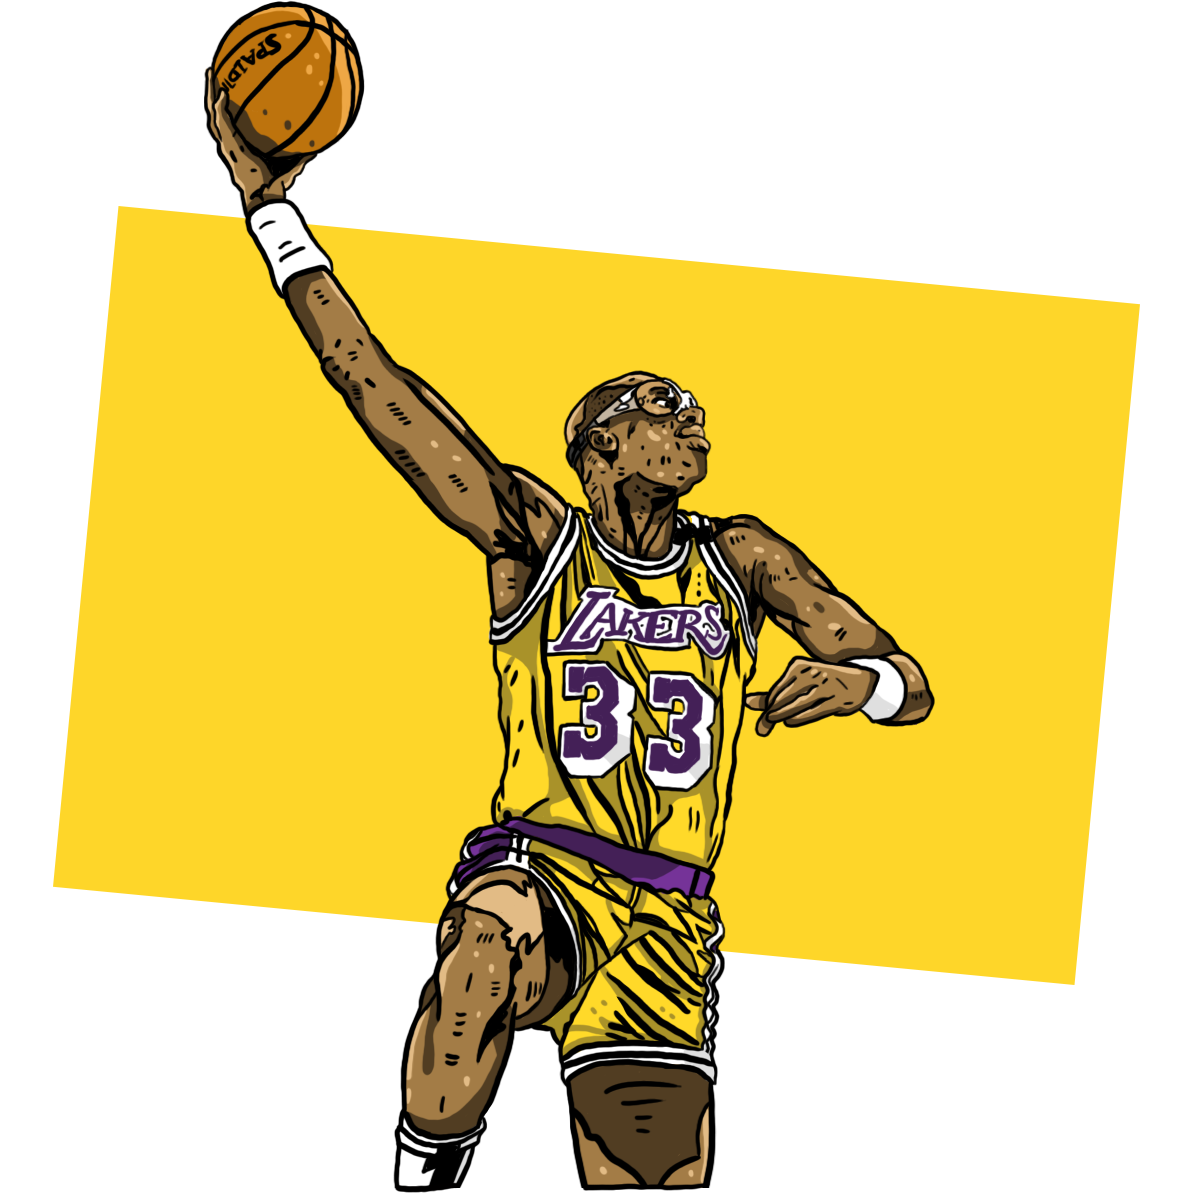 Illustration of Kareem Abdul-Jabbar in a yellow #33 jersey jumping and shooting a sky hook.